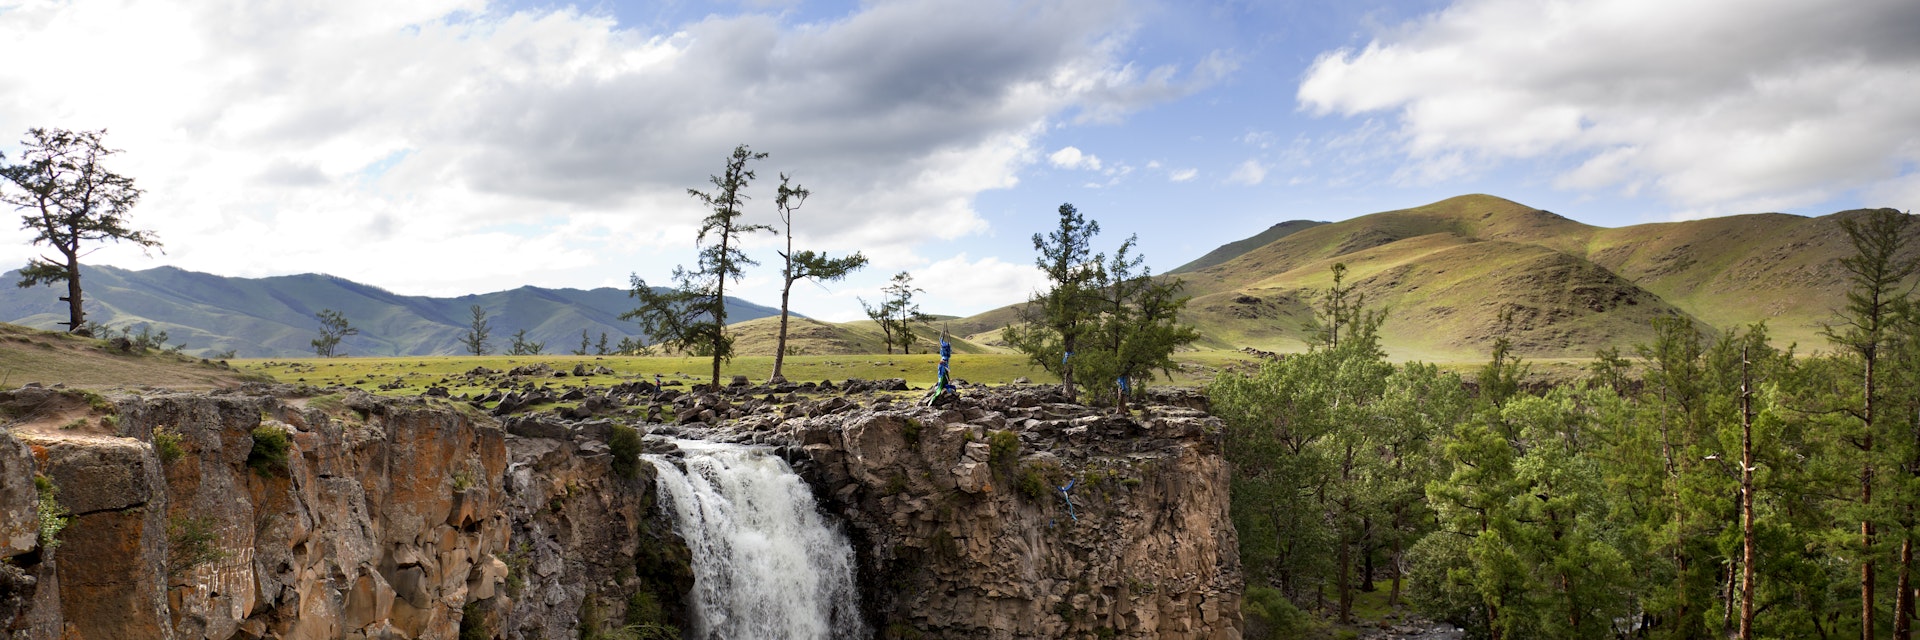 Orkhon idyllic landscape with waterfall
155341598
Asia, At The Edge Of, Blue, Canyon, Day, Gobi Desert, Green, Hole, Horizon Over Land, Horizontal, Idyllic, Independent Mongolia, Landscape, Mongolian Ethnicity, Nature, Nomadic People, Orkhon River, Orkhon Valley, Orkhon Waterfall, Outdoors, River, Scenics, Sky, Steppe, Tourism, Tourist, Traditional Culture, Travel, Tree, UNESCO World Heritage Site, Valley, Water, Waterfall